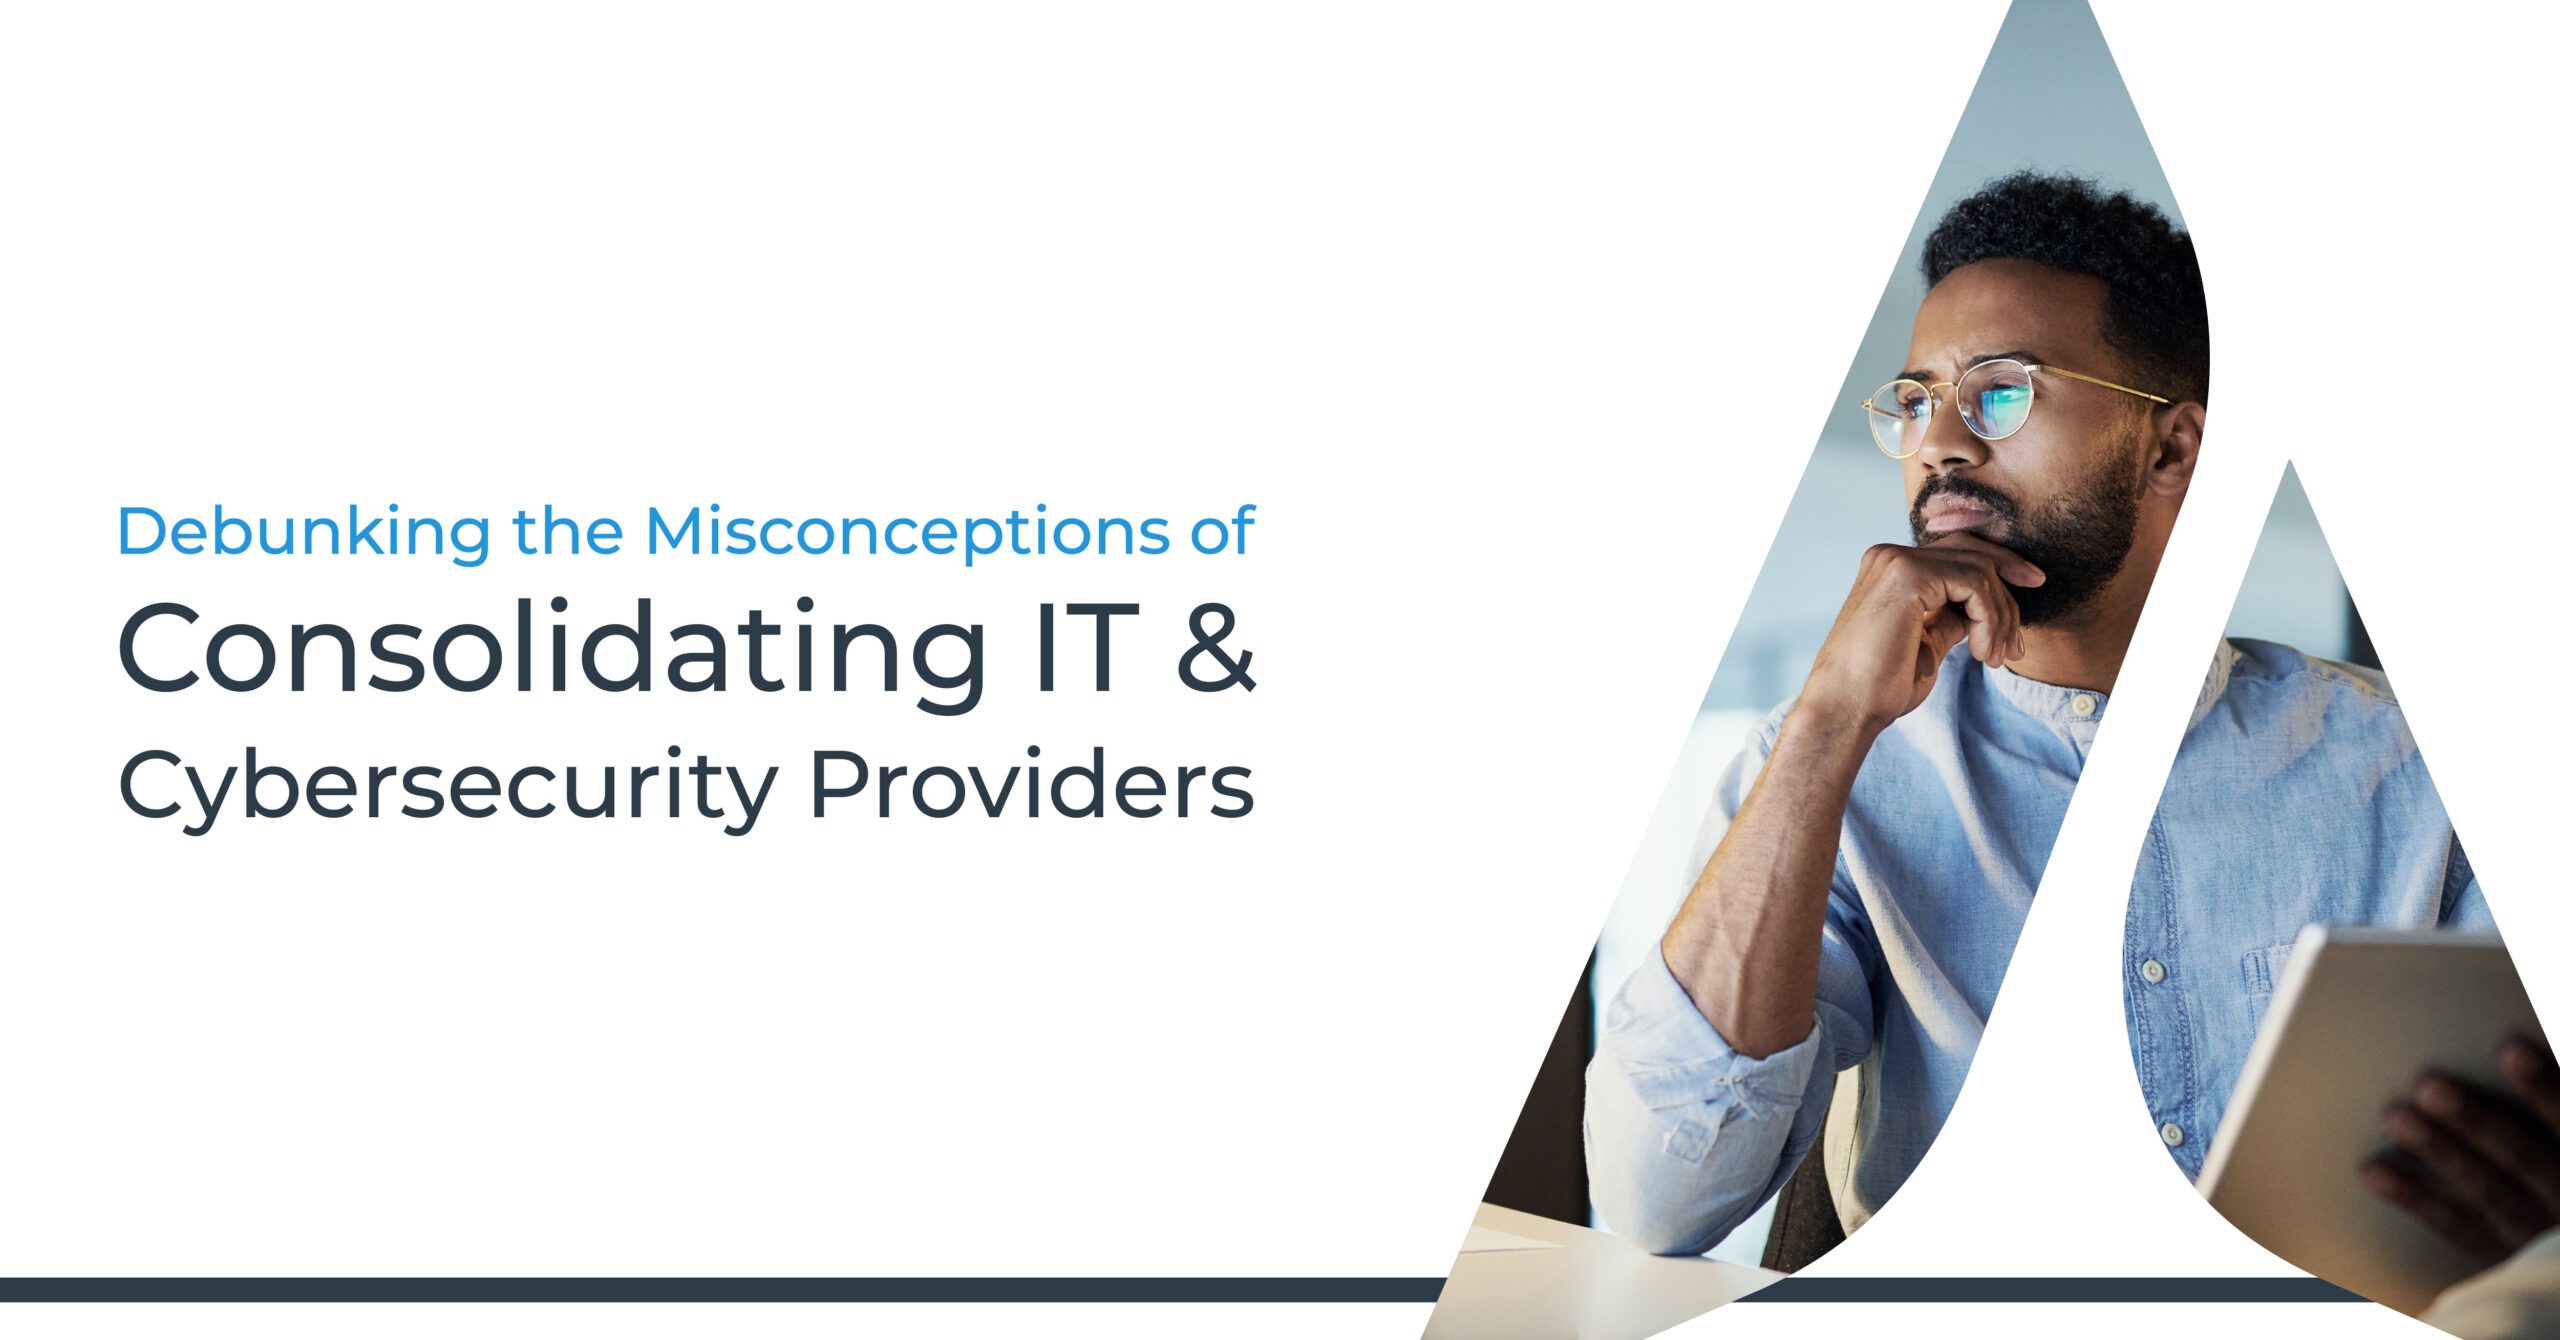 Misconceptions of Consolidating IT & Cybersecurity Providers